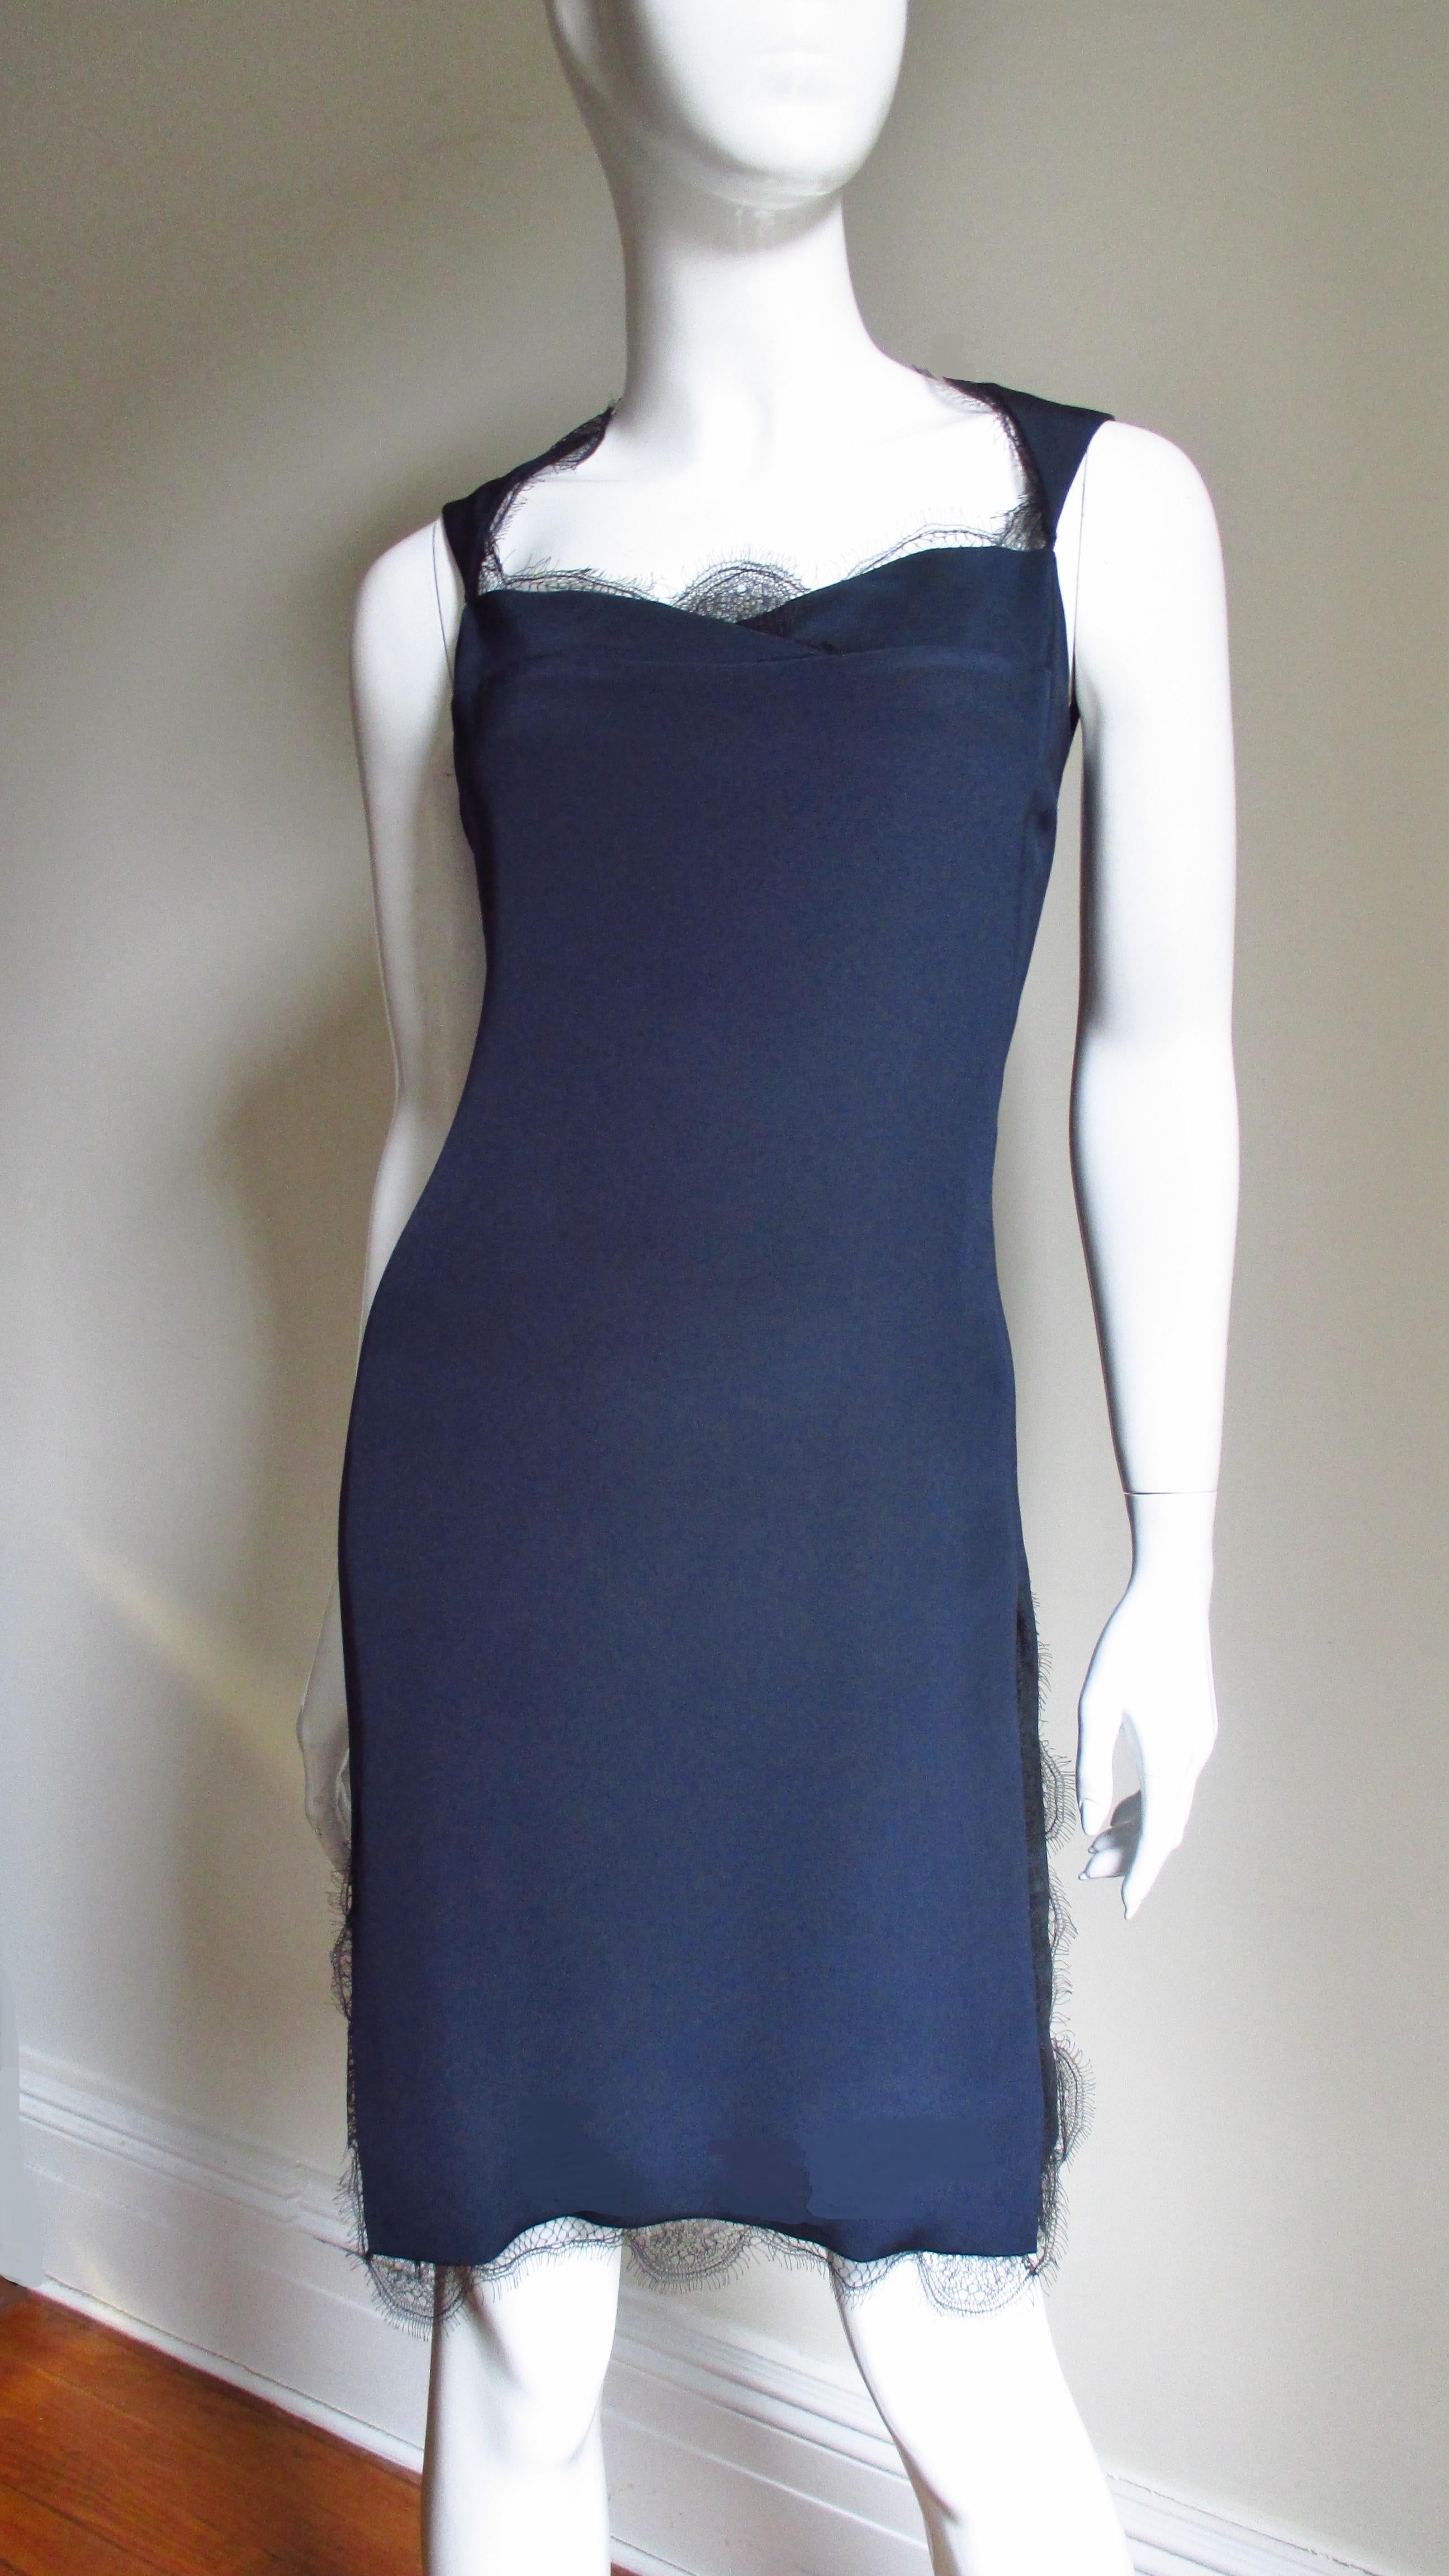 A beautiful rich navy blue silk dress from Bill Blass.   It has a sweetheart neckline create by 2 horiozntally inset angular pieces the cross at center front and 2 triangular front straps that form a crew neckline in the back.  There are no side